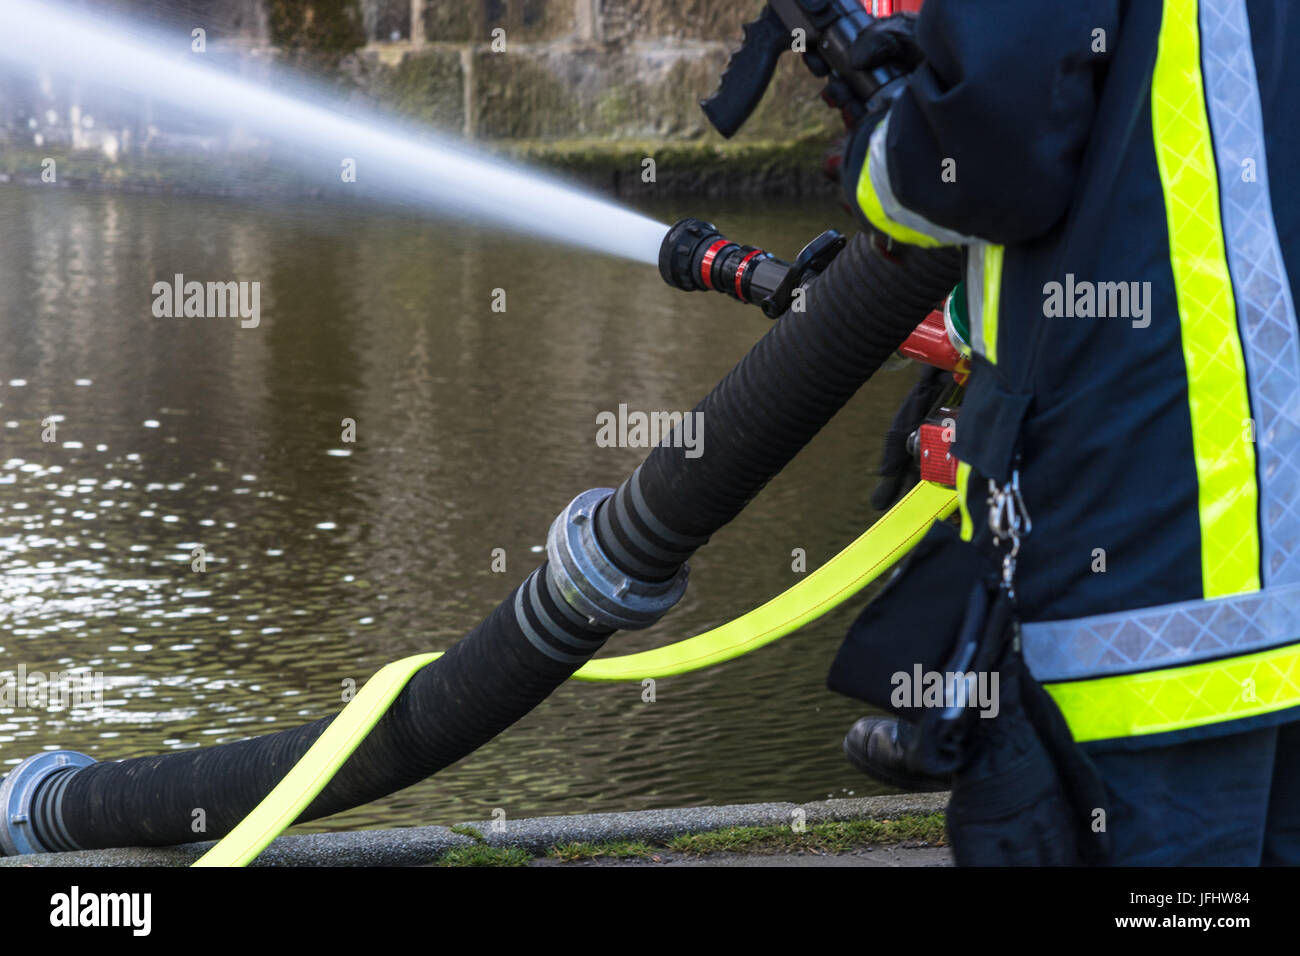 Fire department sprayed extinguishing water during an exercise. Stock Photo